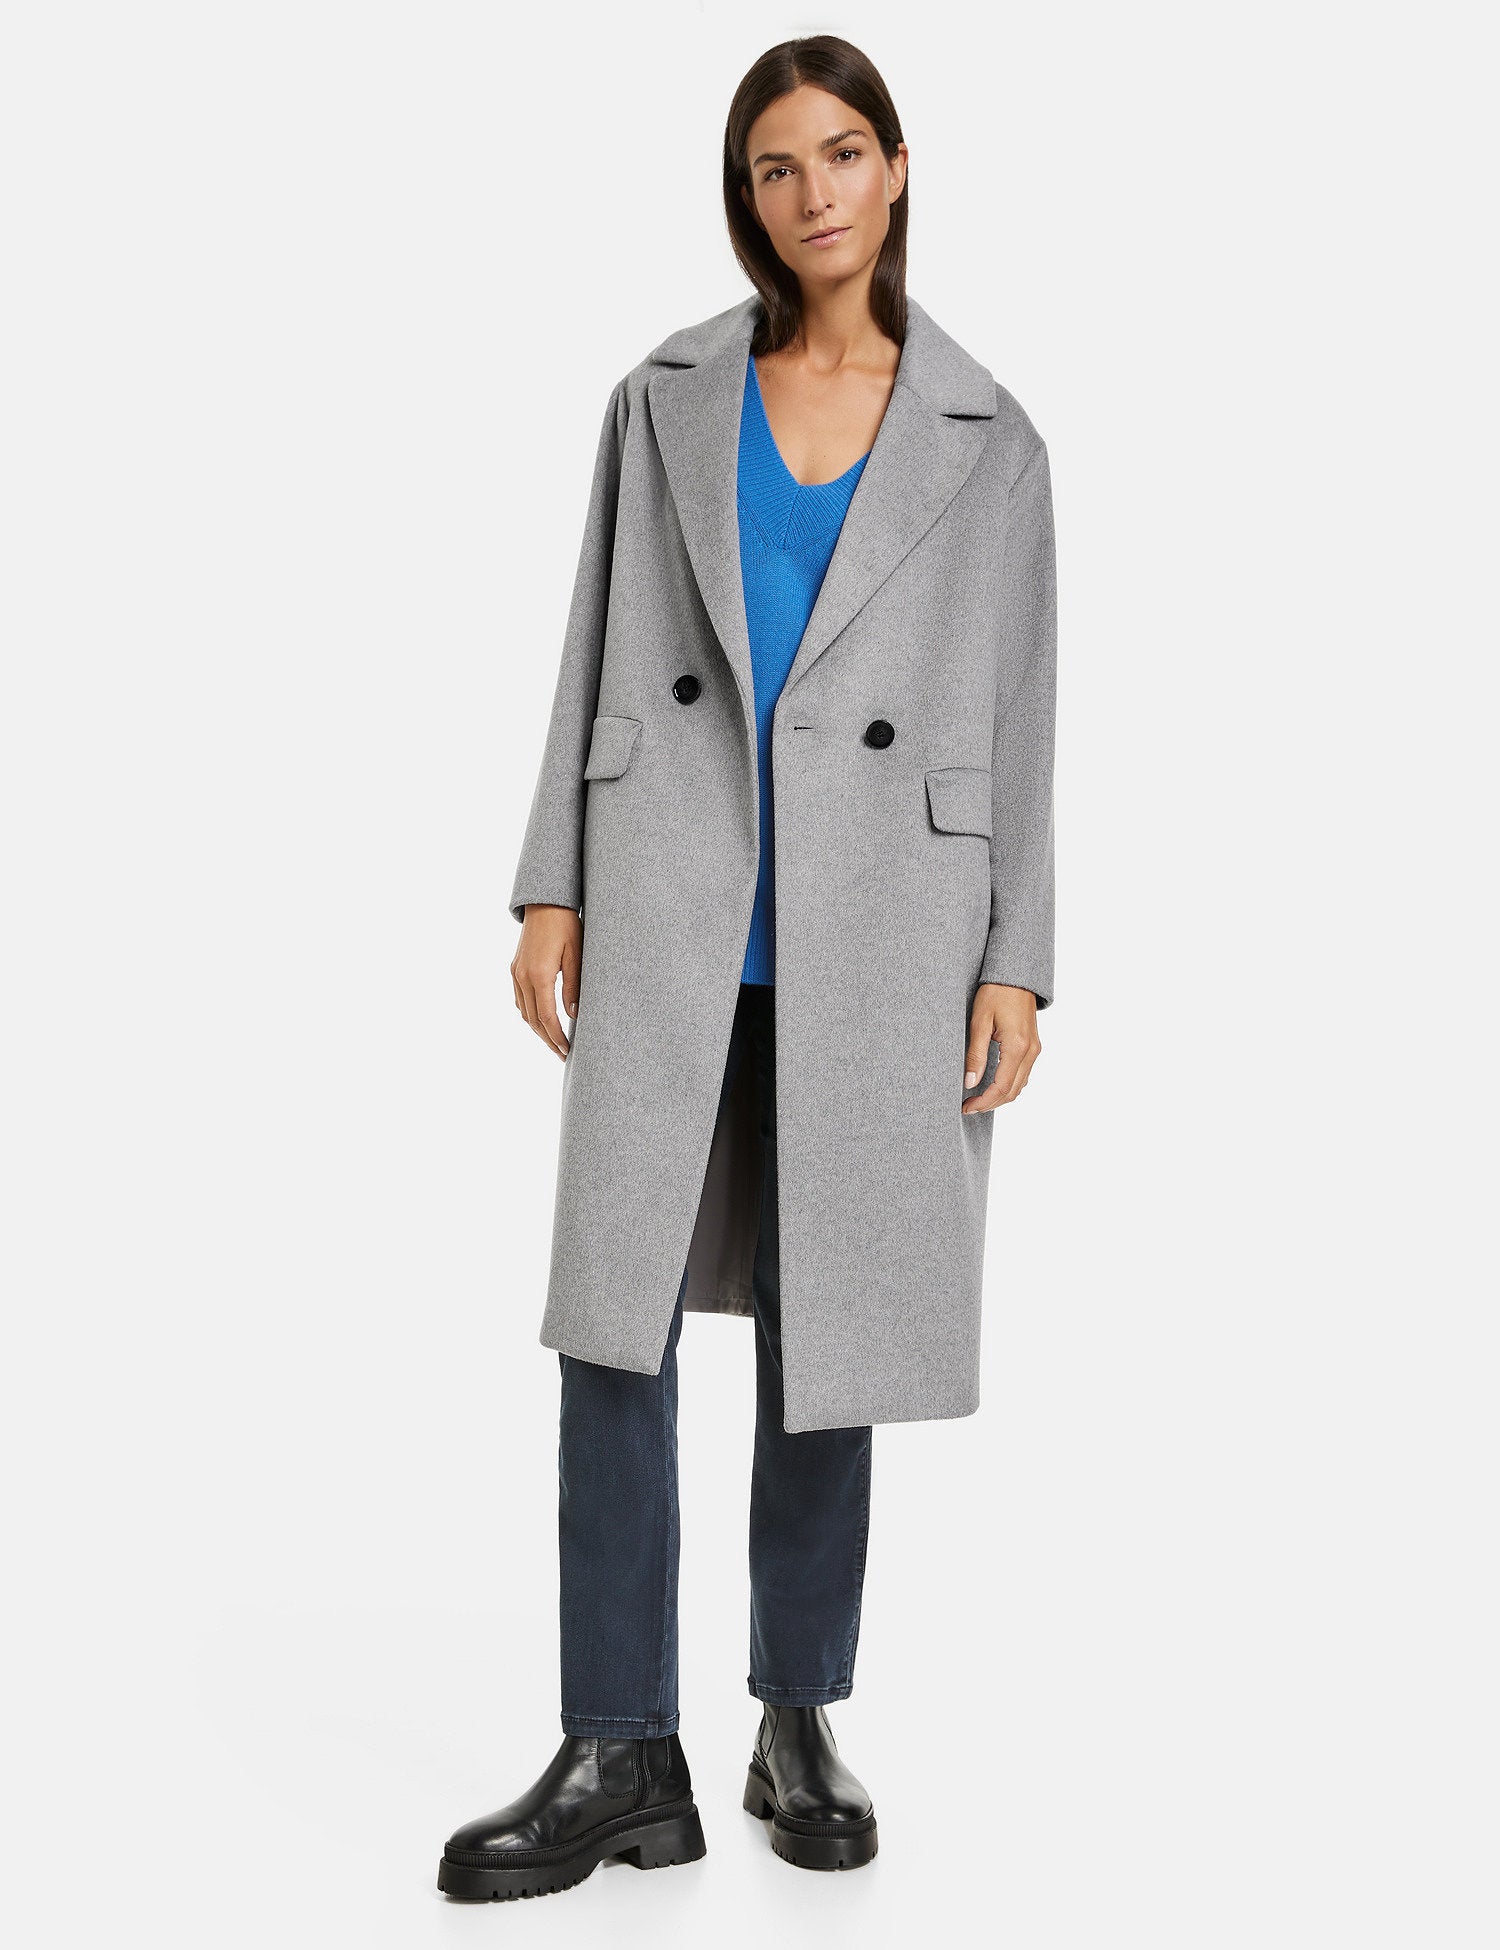 Coat In A Slightly Oversized Cut With Wool_250014-31135_20348_07